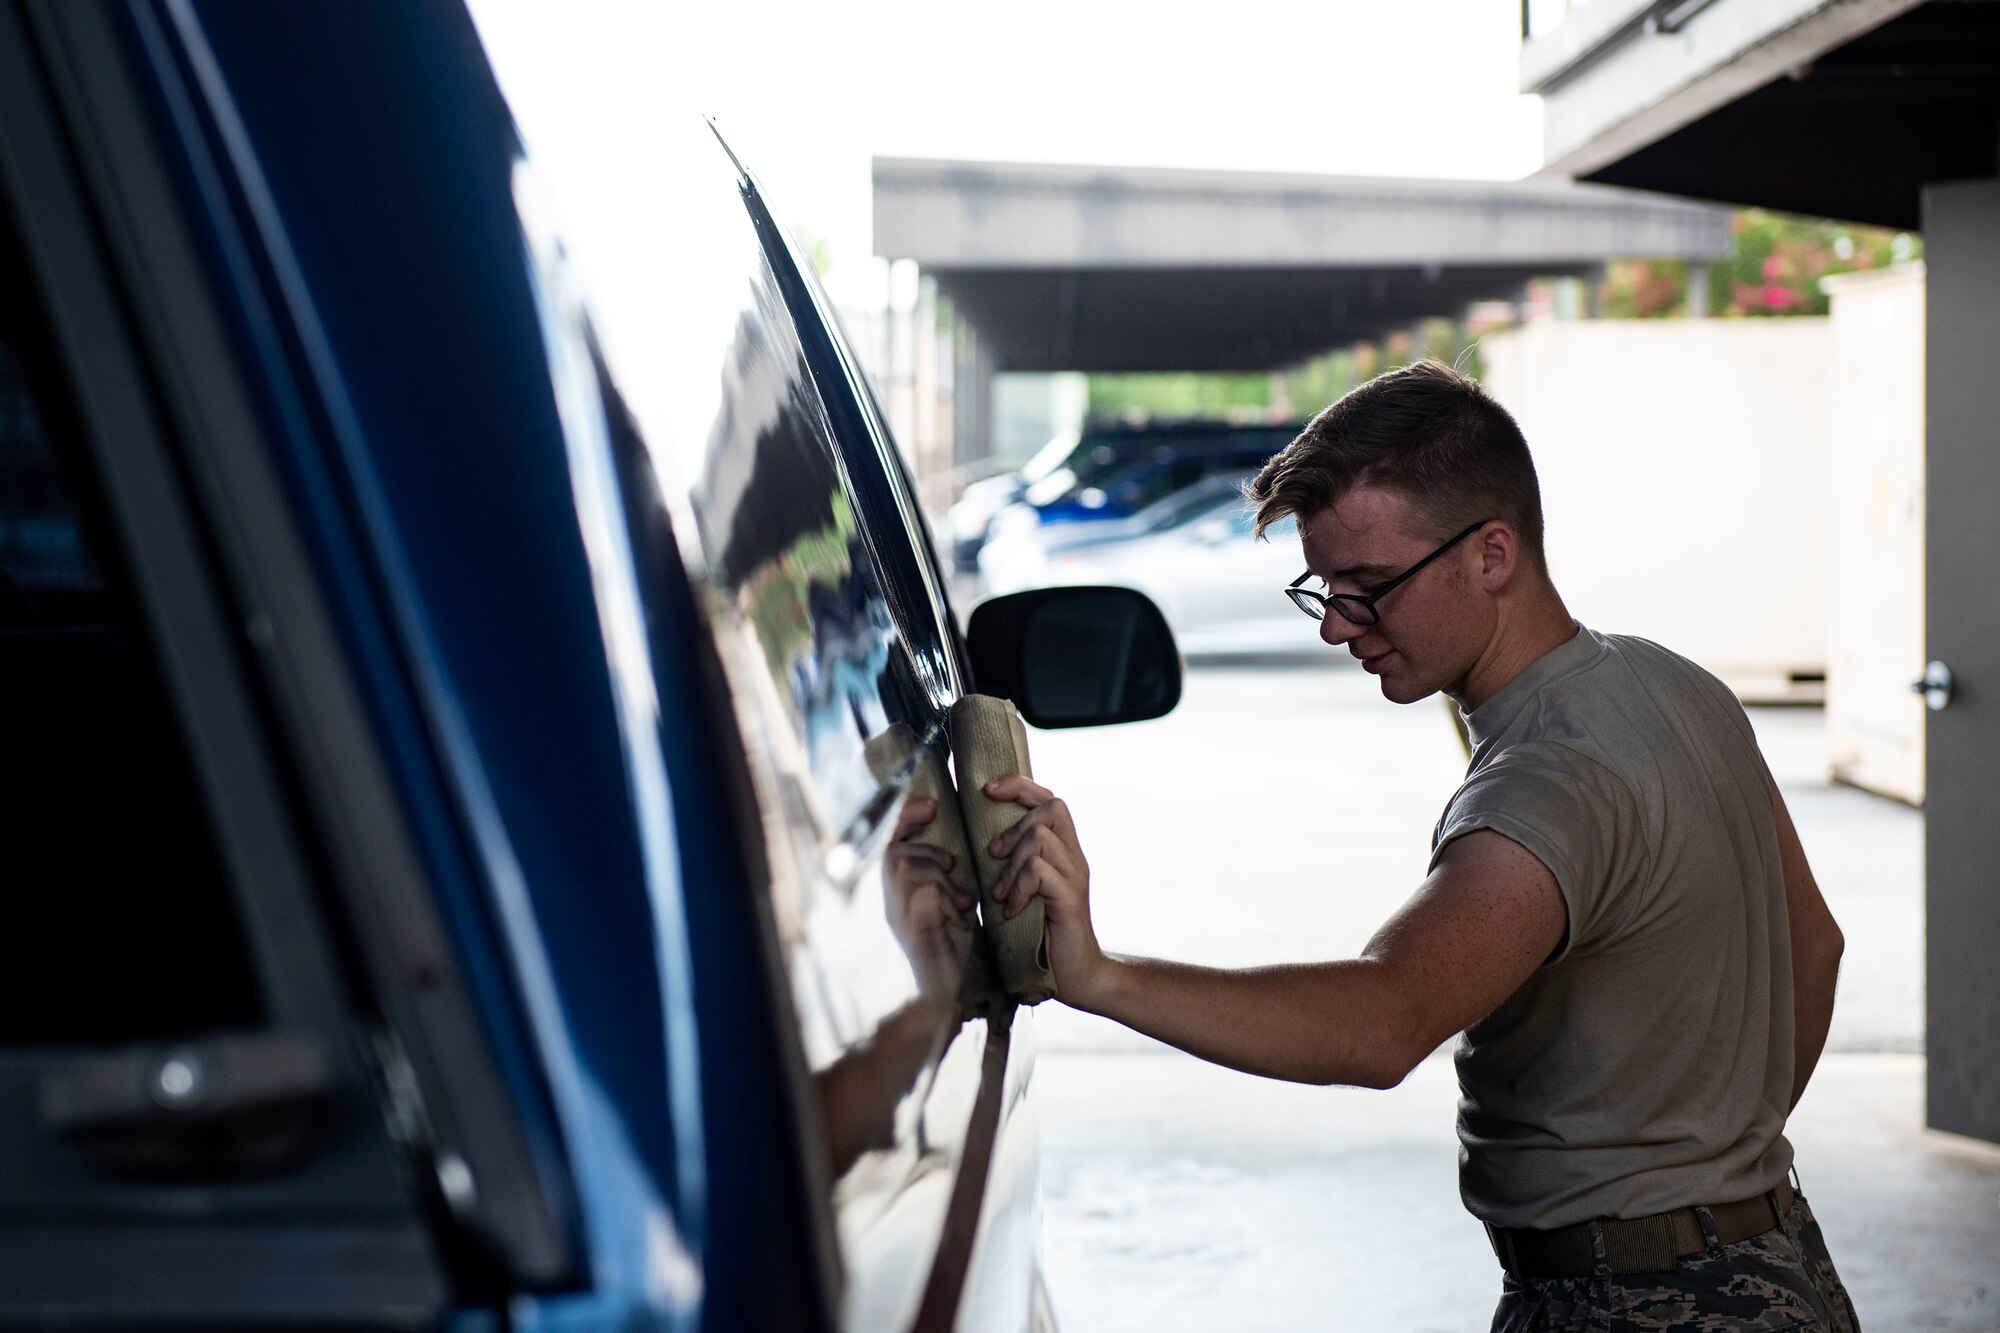 Senior Airman Alex Koch, 23d Logistics Readiness Squadron ground transportation operator, dries off a truck during a vehicle inspection, Aug. 12, 2019, at Moody Air Force Base, Ga. The ground transportation flight inspects all of their 56 vehicles weekly to ensure they remain operational, and by performing routine inspections, they’re able to maintain the longevity of their fleet. (U.S. Air Force photo by Senior Airman Erick Requadt)